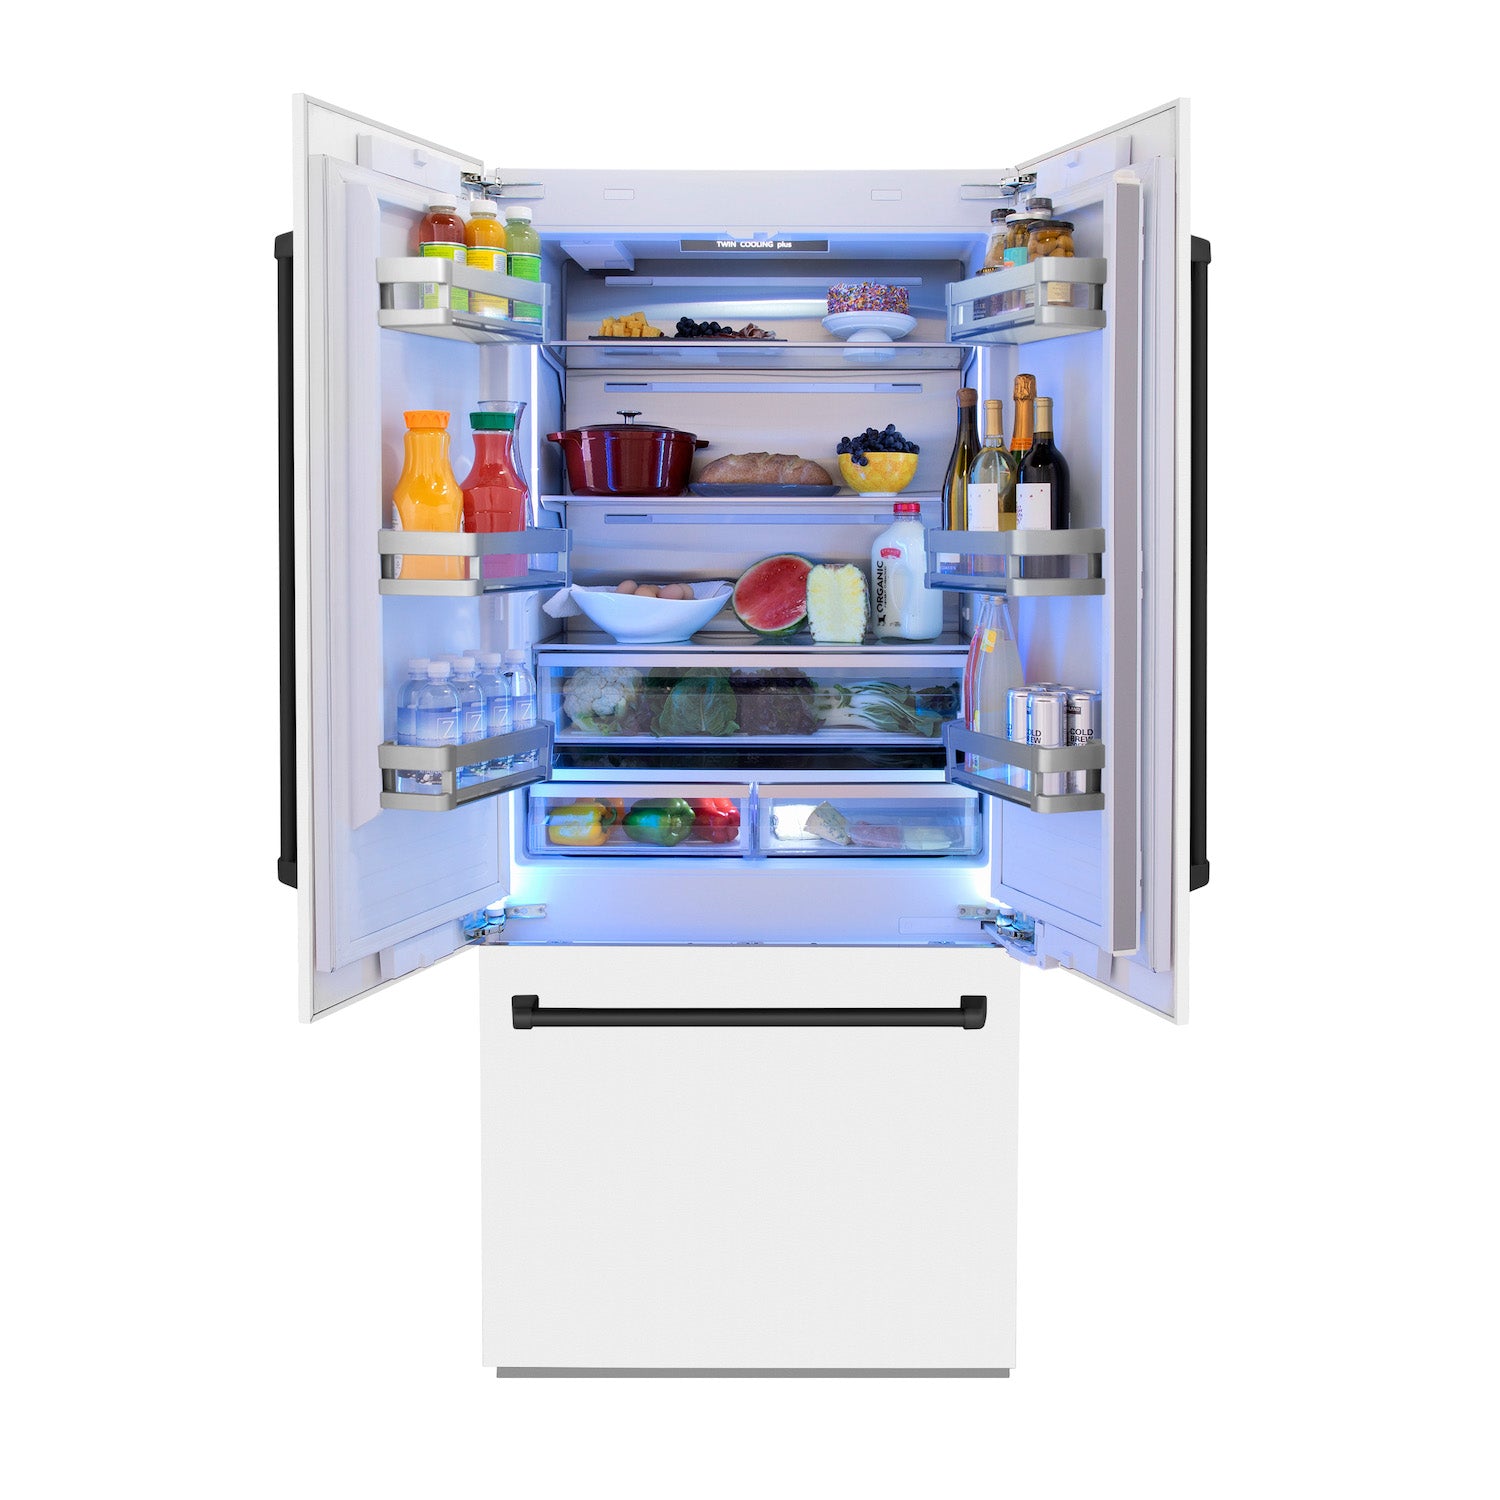 ZLINE Autograph Edition 36 in. 19.6 cu. ft. Built-in 2-Door Bottom Freezer Refrigerator with Internal Water and Ice Dispenser in White Matte with Matte Black Accents (RBIVZ-WM-36-MB) front, open with food inside refrigeration compartment.